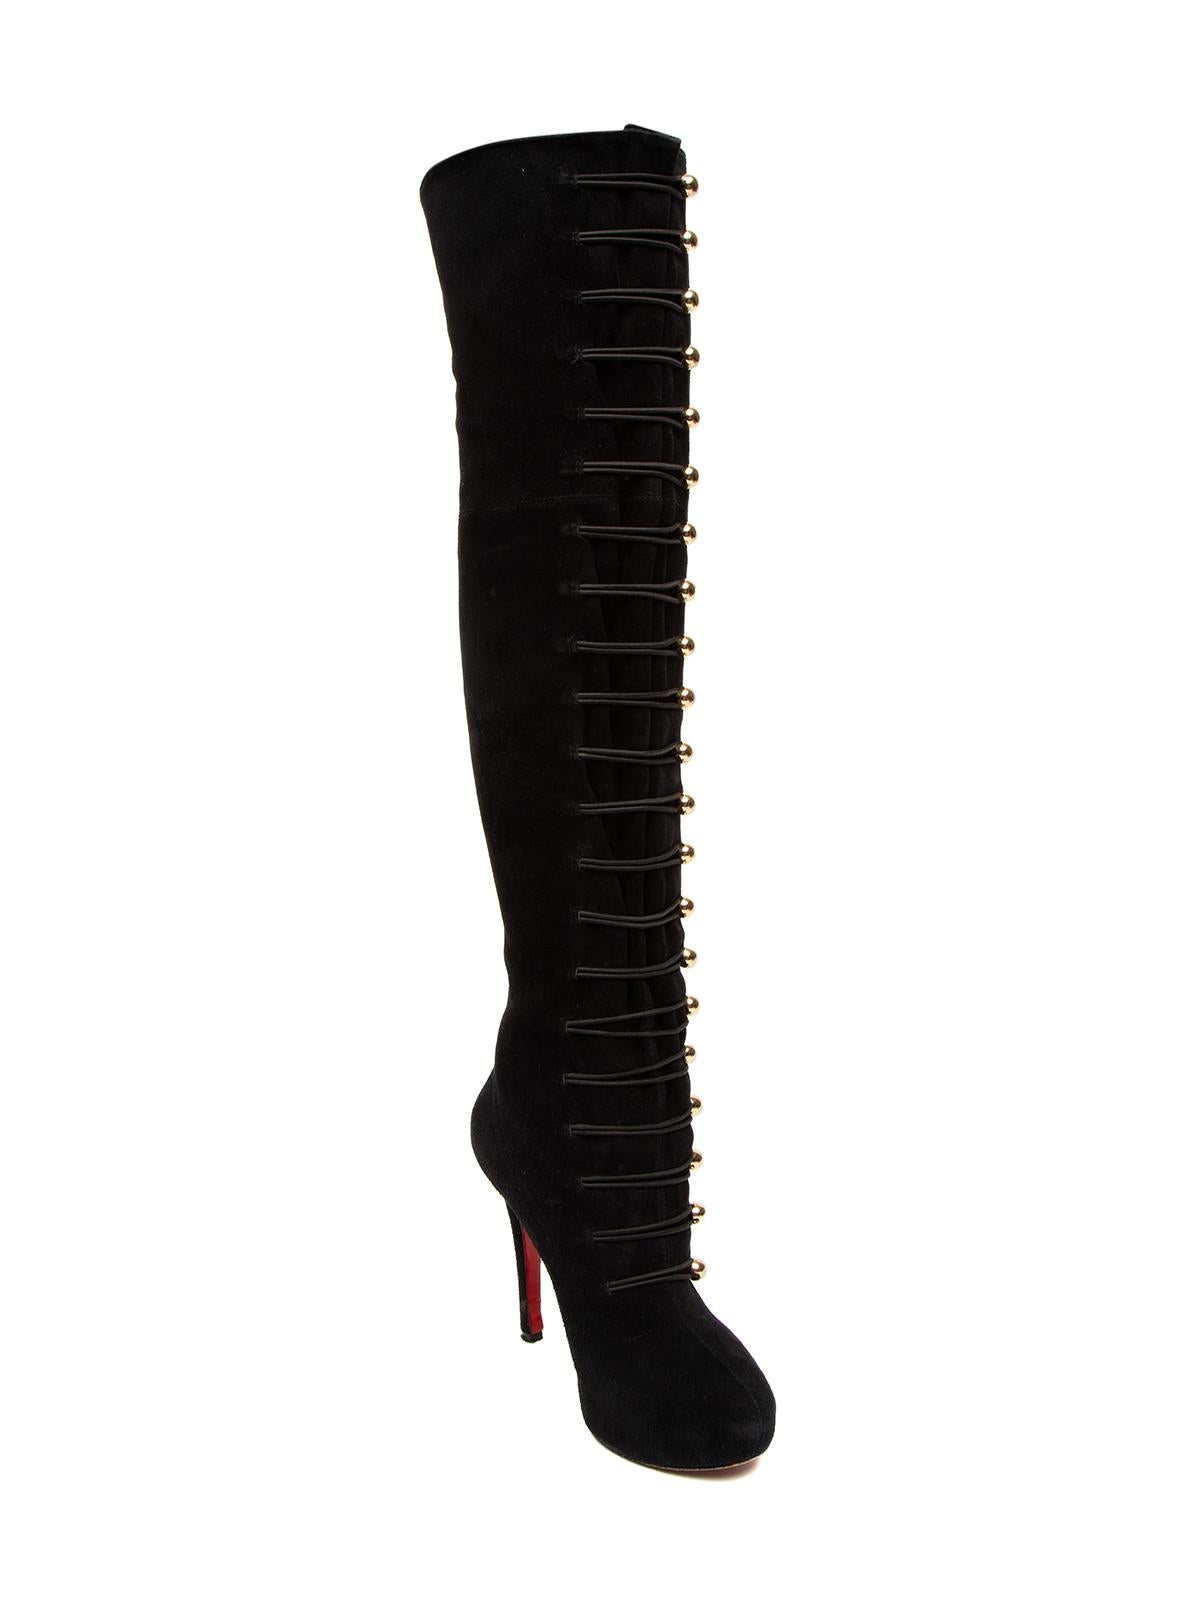 Editor’s Note Up your designer resale footwear game with this pair of pre-owned Christian Louboutin luxury consignment boots. Featuring platform soles, these used Christian Louboutin gems are set to become your next go-to second-hand designer shoes.